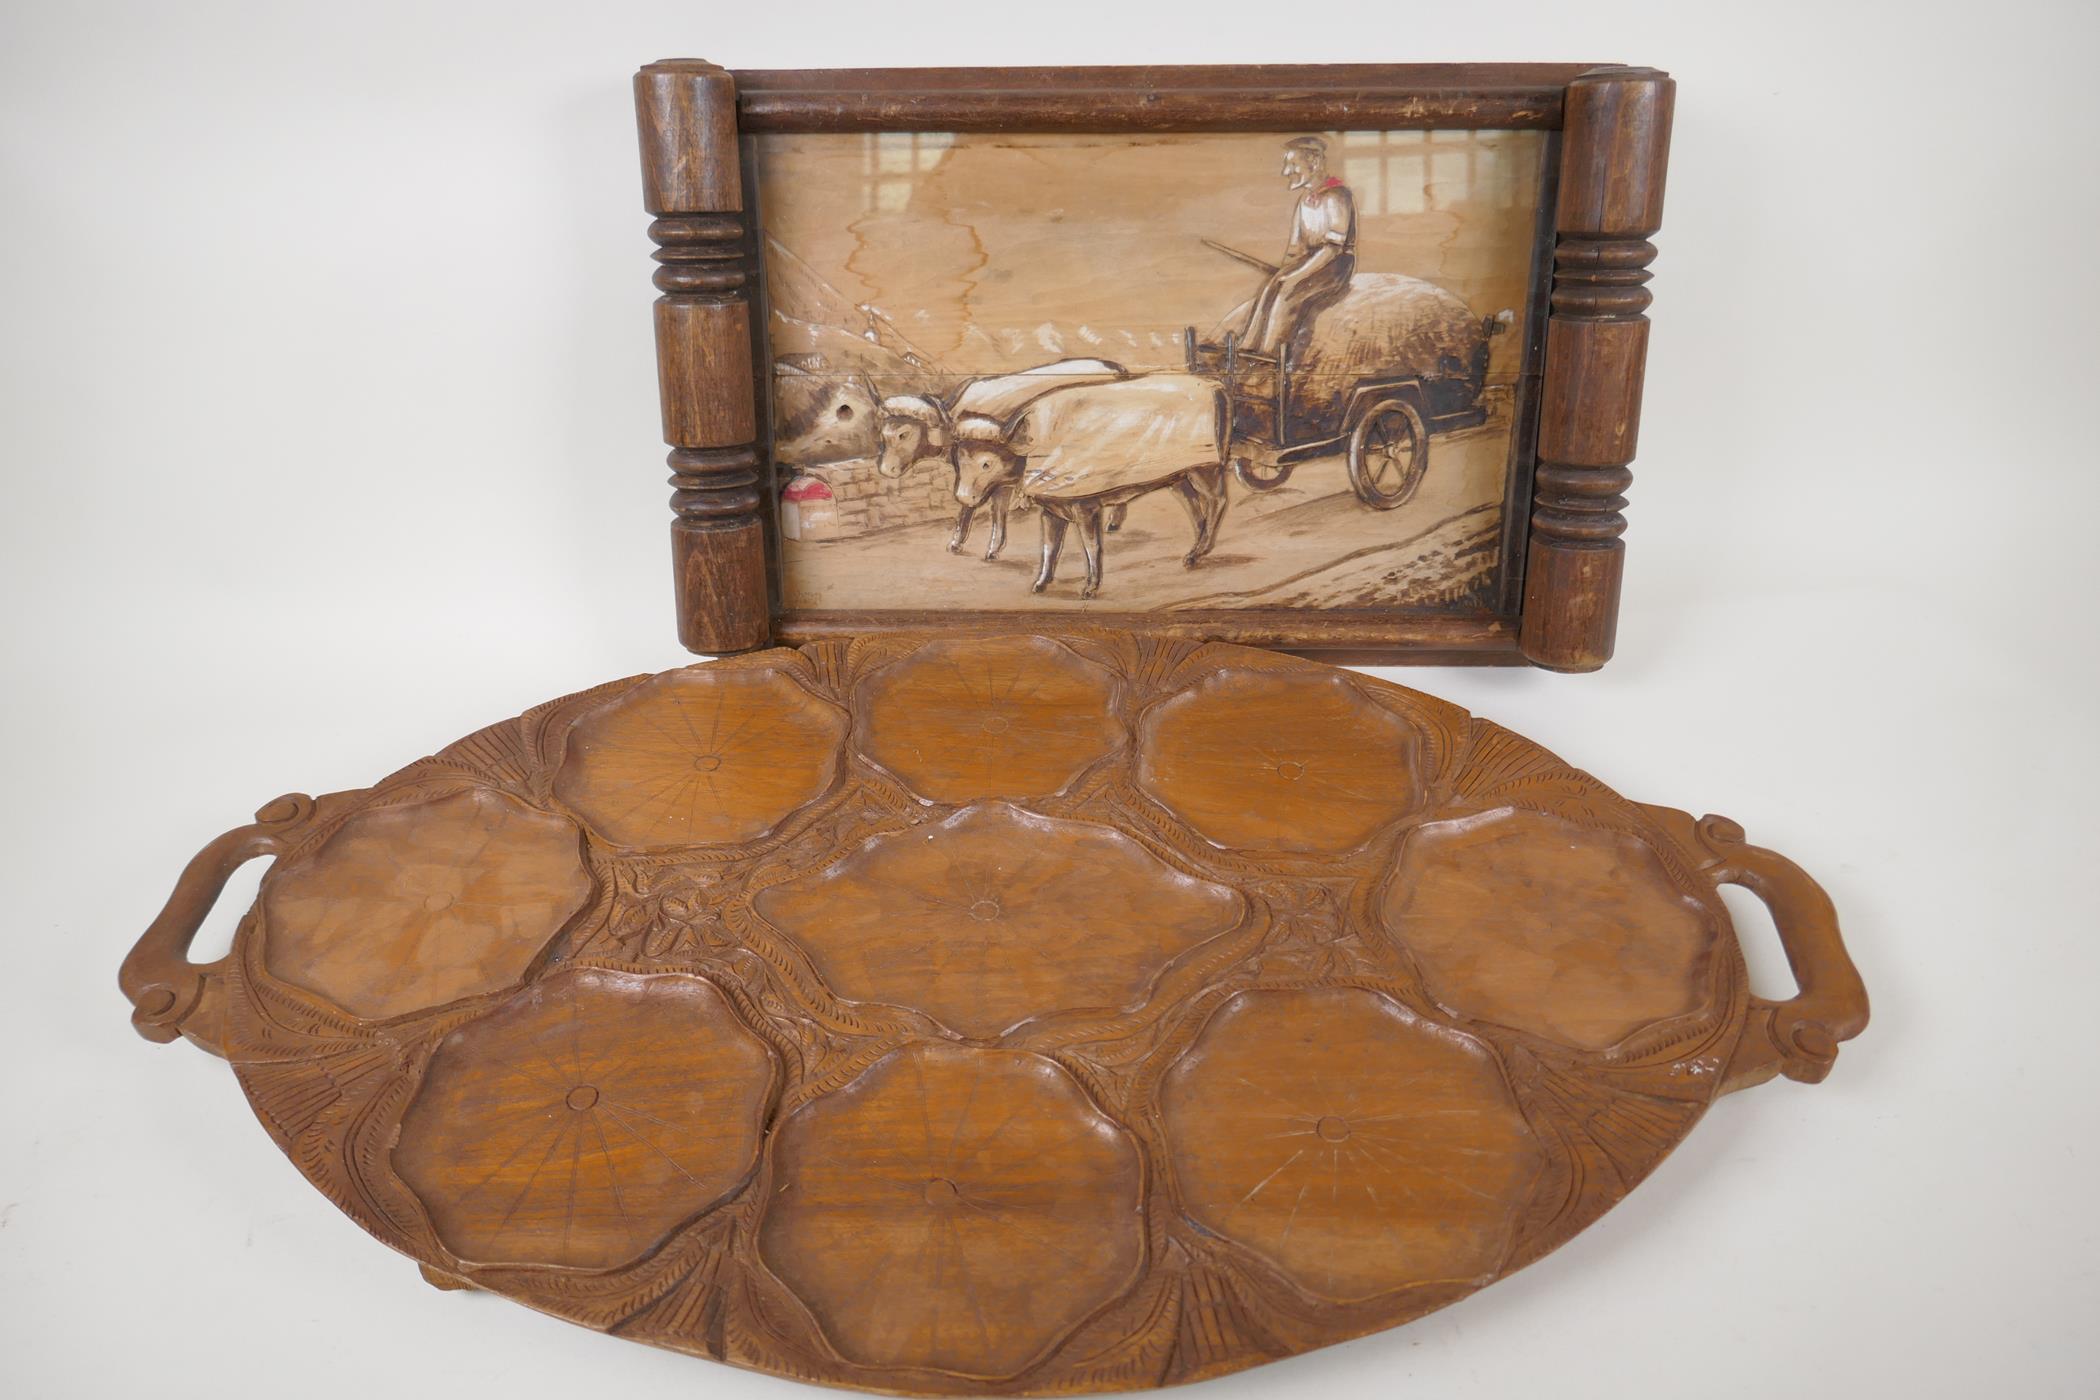 A vintage European carved wooden tray decorated with a naive scene of a man driving a bullock